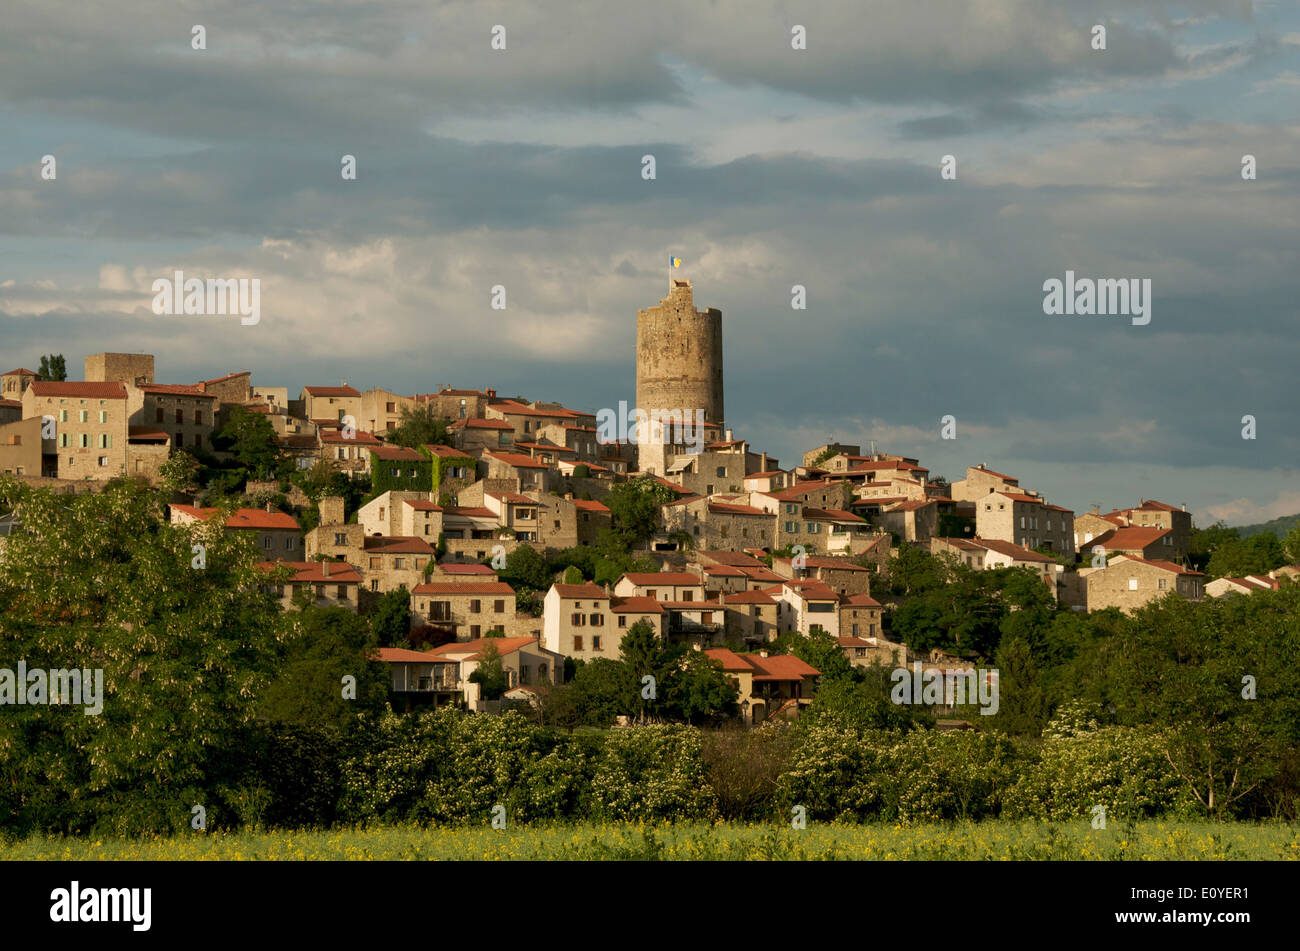 Old fortified village of Montpeyroux, Puy de Dome, Auvergne, France, Europe Stock Photo